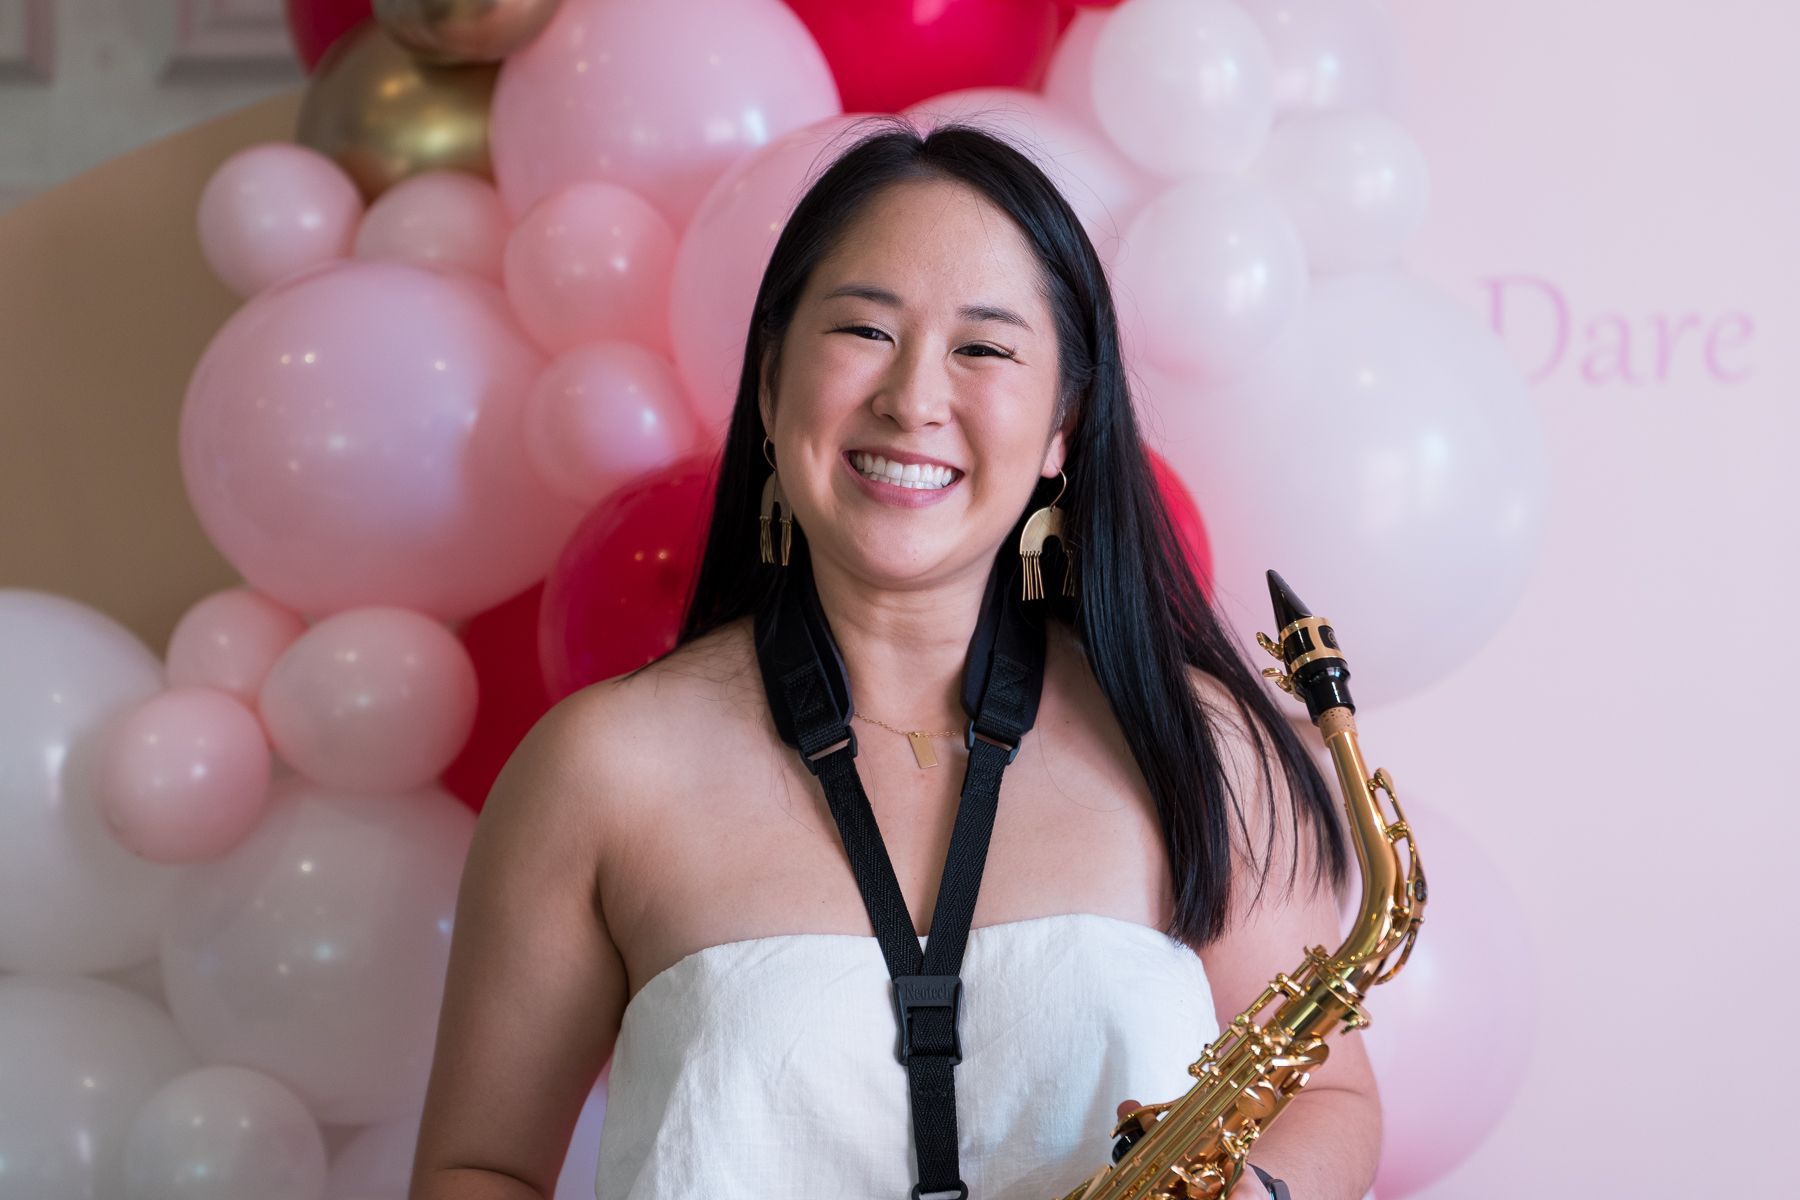 DJ Emily Gracie with her Sax in front of pink balloons